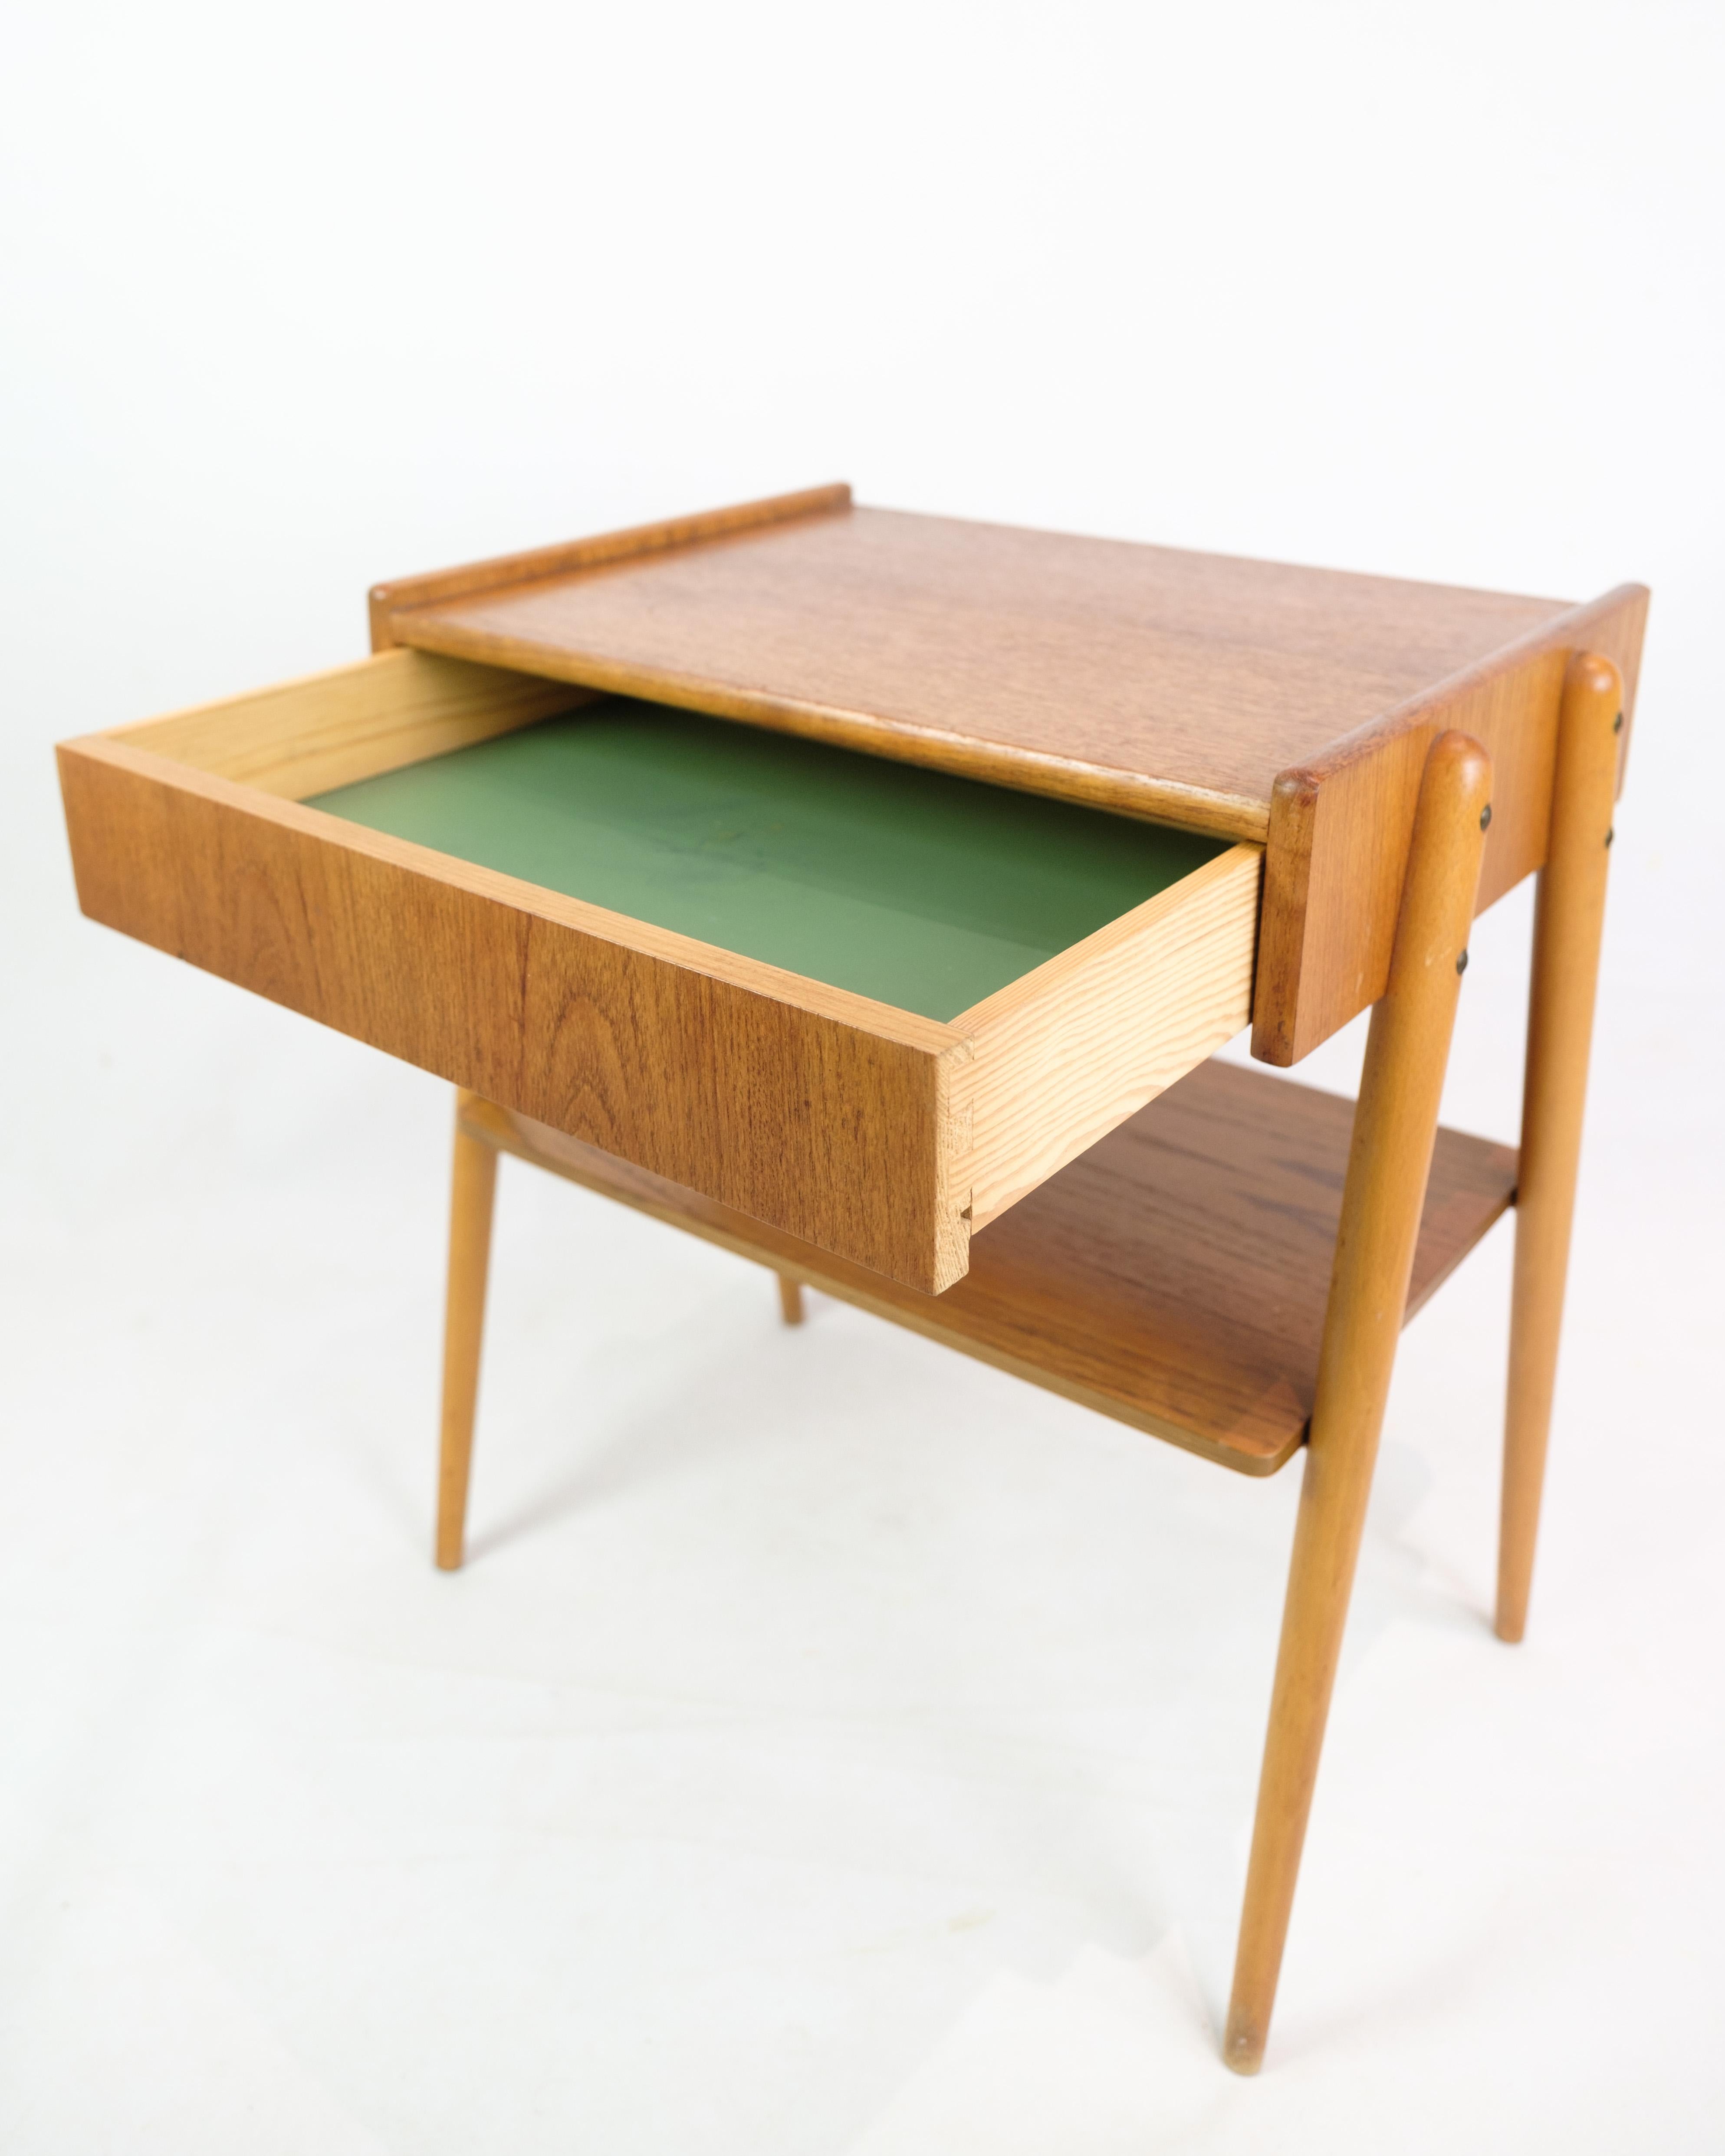 Set of Nightstands In Teak, By AB Carlström & Co Furniture Factory From 1950s For Sale 3